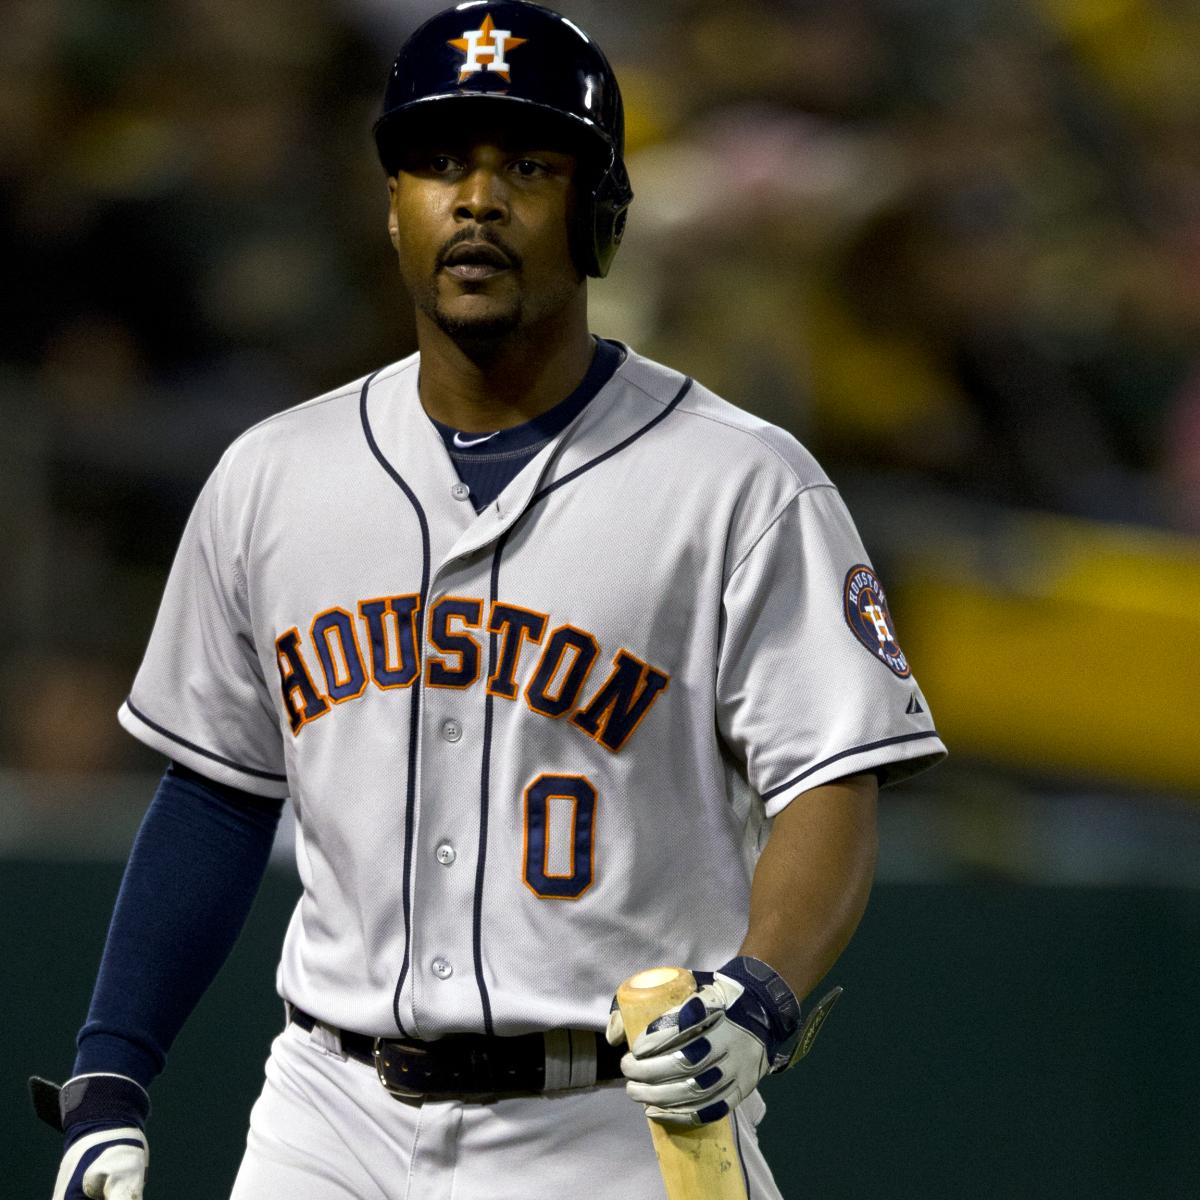 The Drive: Former Astros outfielder L.J. Hoes